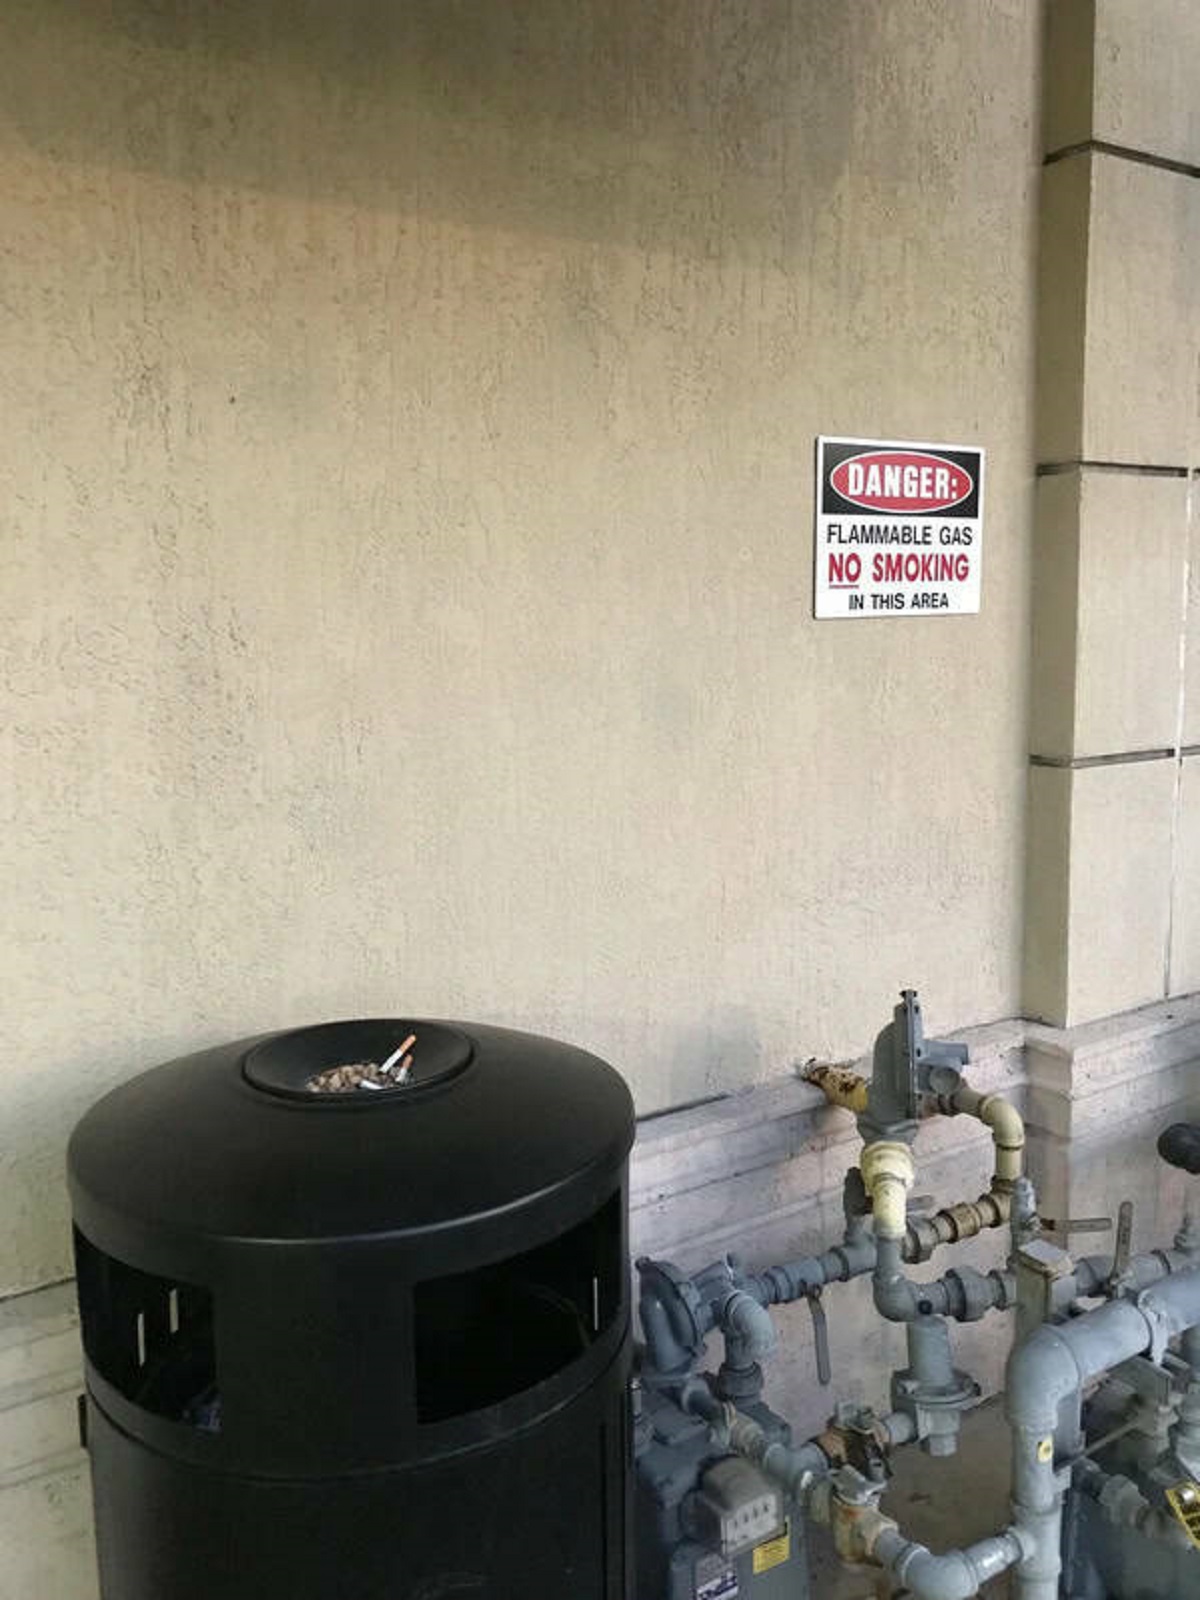 “Saw this on a competitors job-site. The city inspector letting them know it’s wrong.”